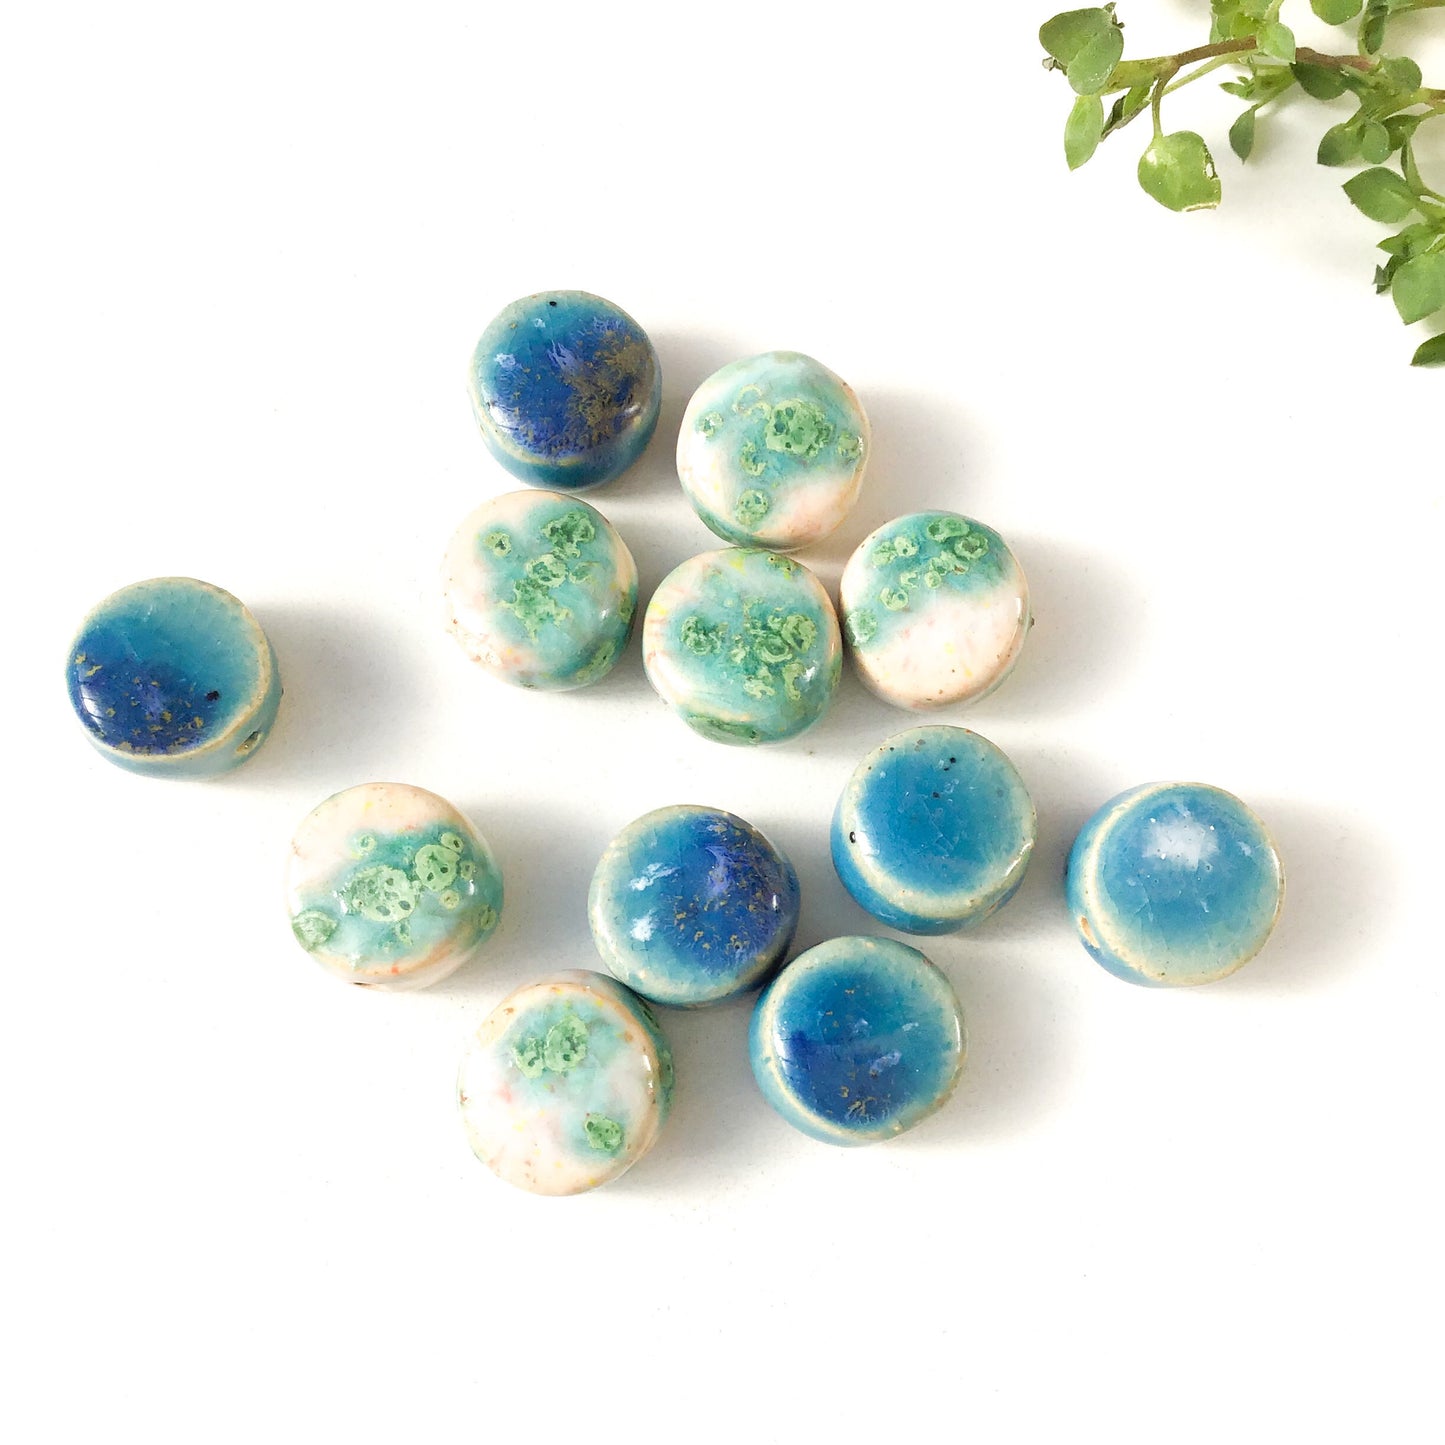 Round Handmade Clay Beads - Turquoise, White, and Ocean Blue Ceramic Beads - 9/16" x 1/4"